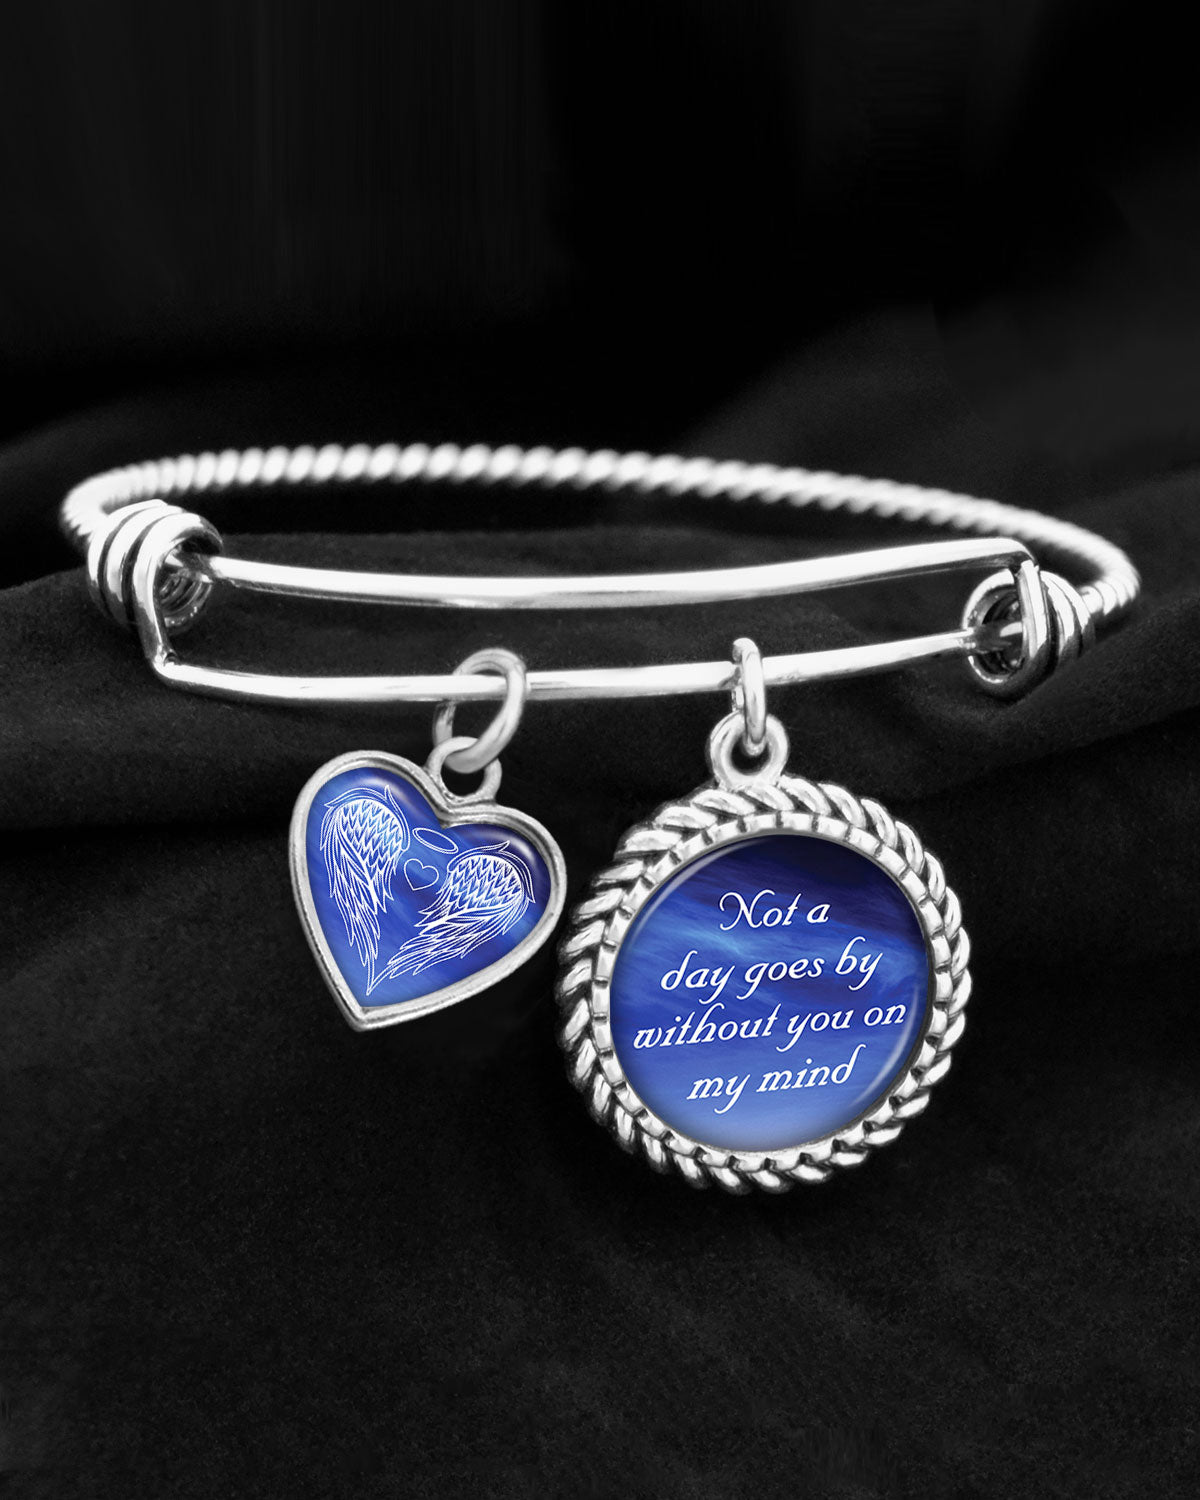 Not A Day Goes By Without You On My Mind Charm Bracelet